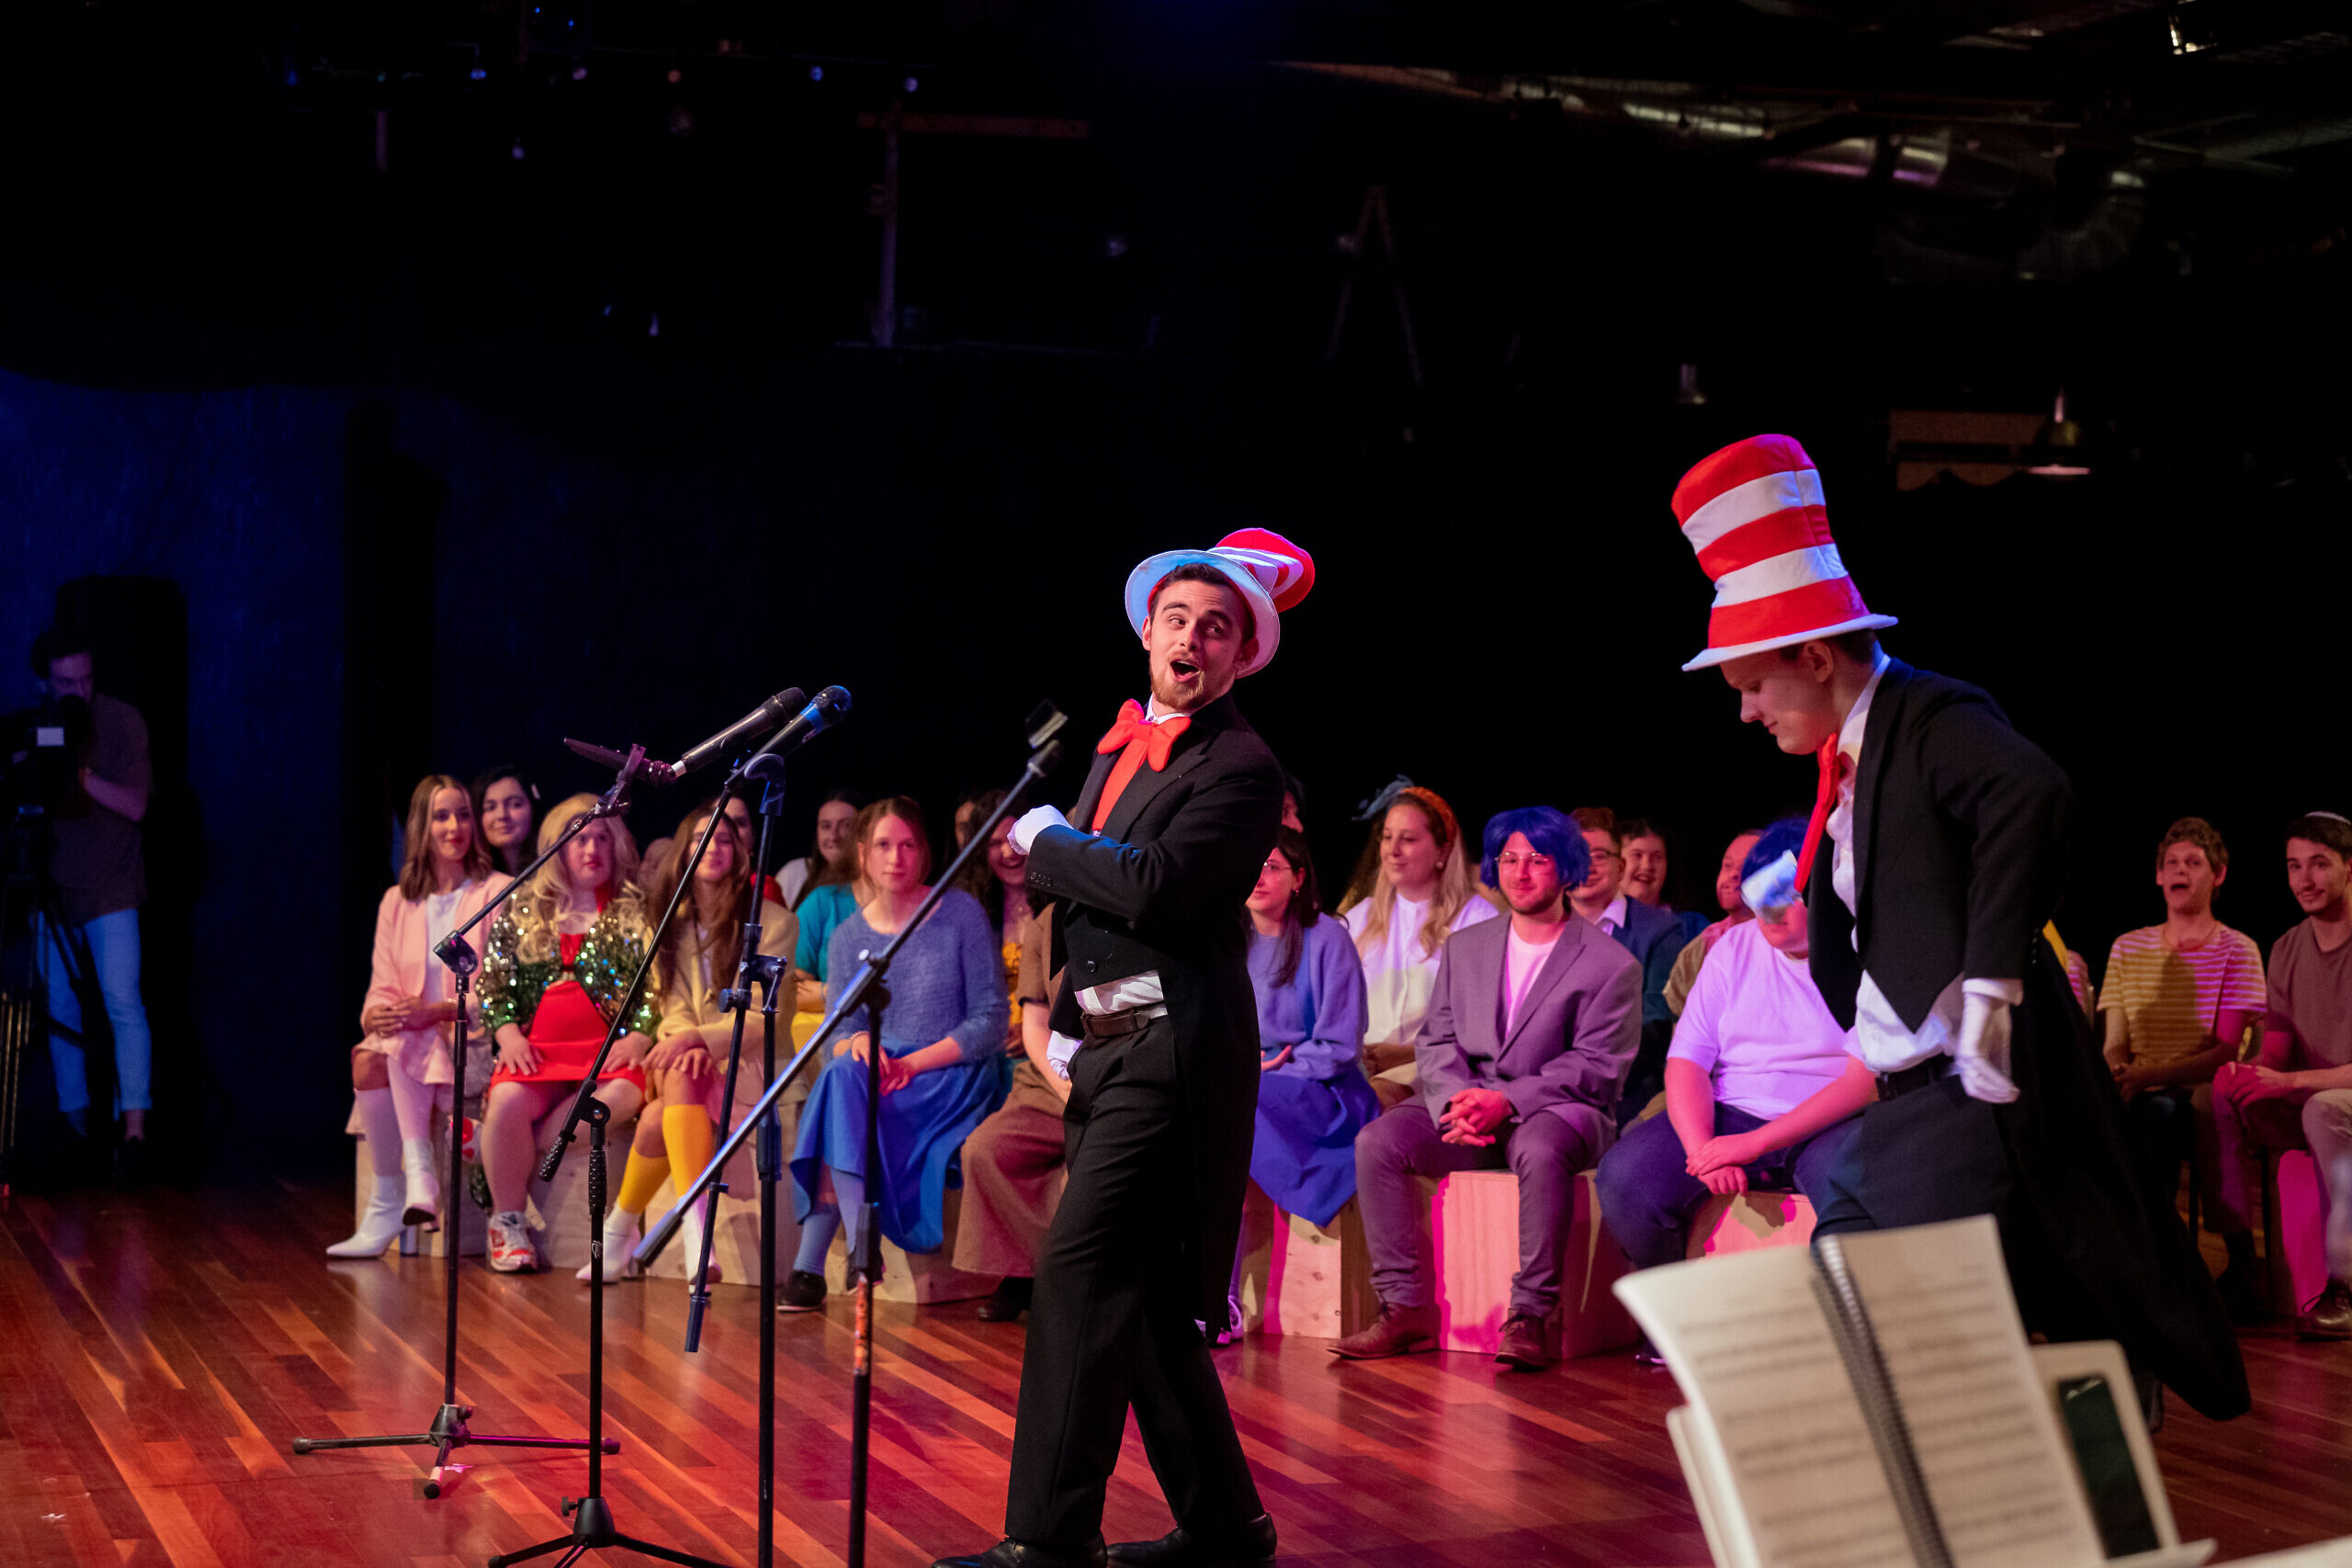 Seussical the Musical which The Stars and the Moon showcased last year